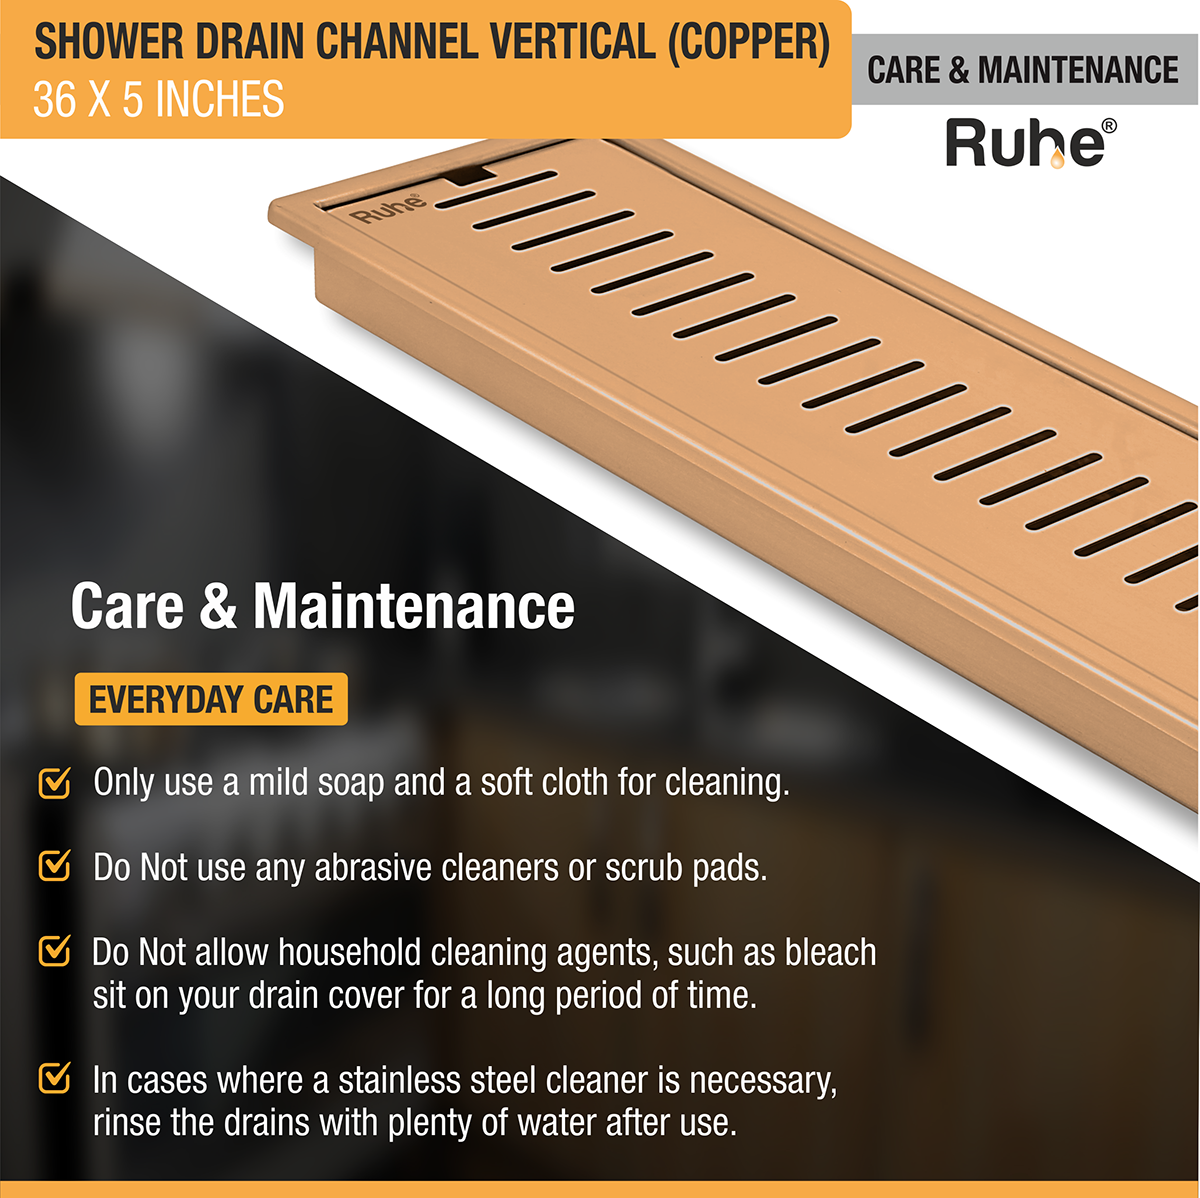 Vertical Shower Drain Channel (36 x 5 Inches) ROSE GOLD/ANTIQUE COPPER care and maintenance